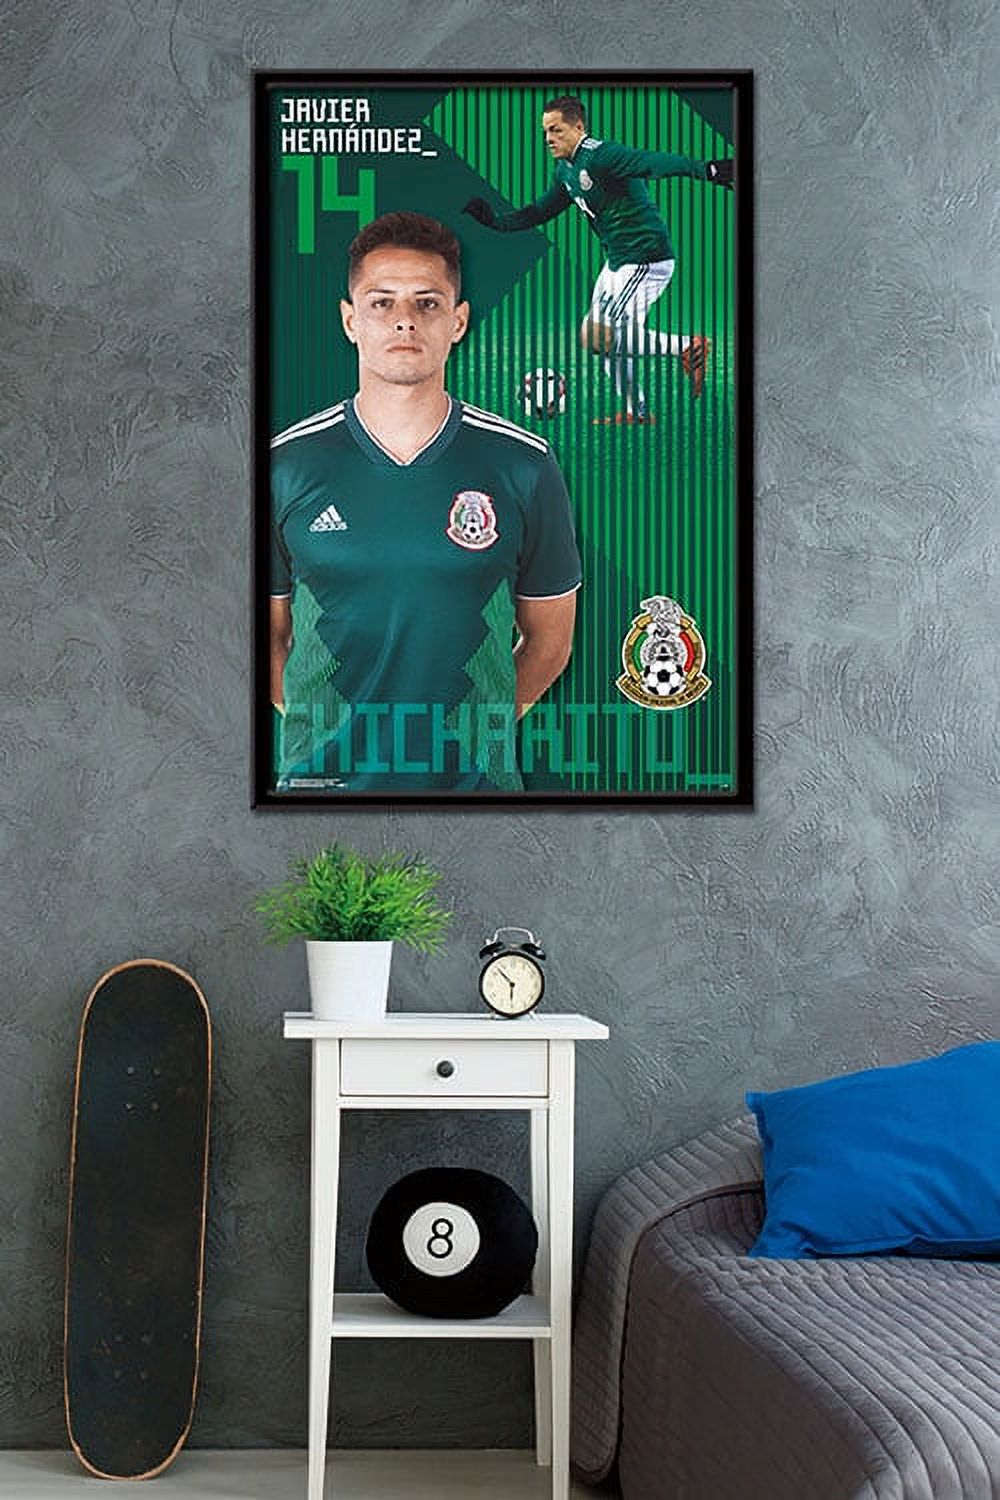 Mexico National Soccer Team - Javier Hernández - image 2 of 2